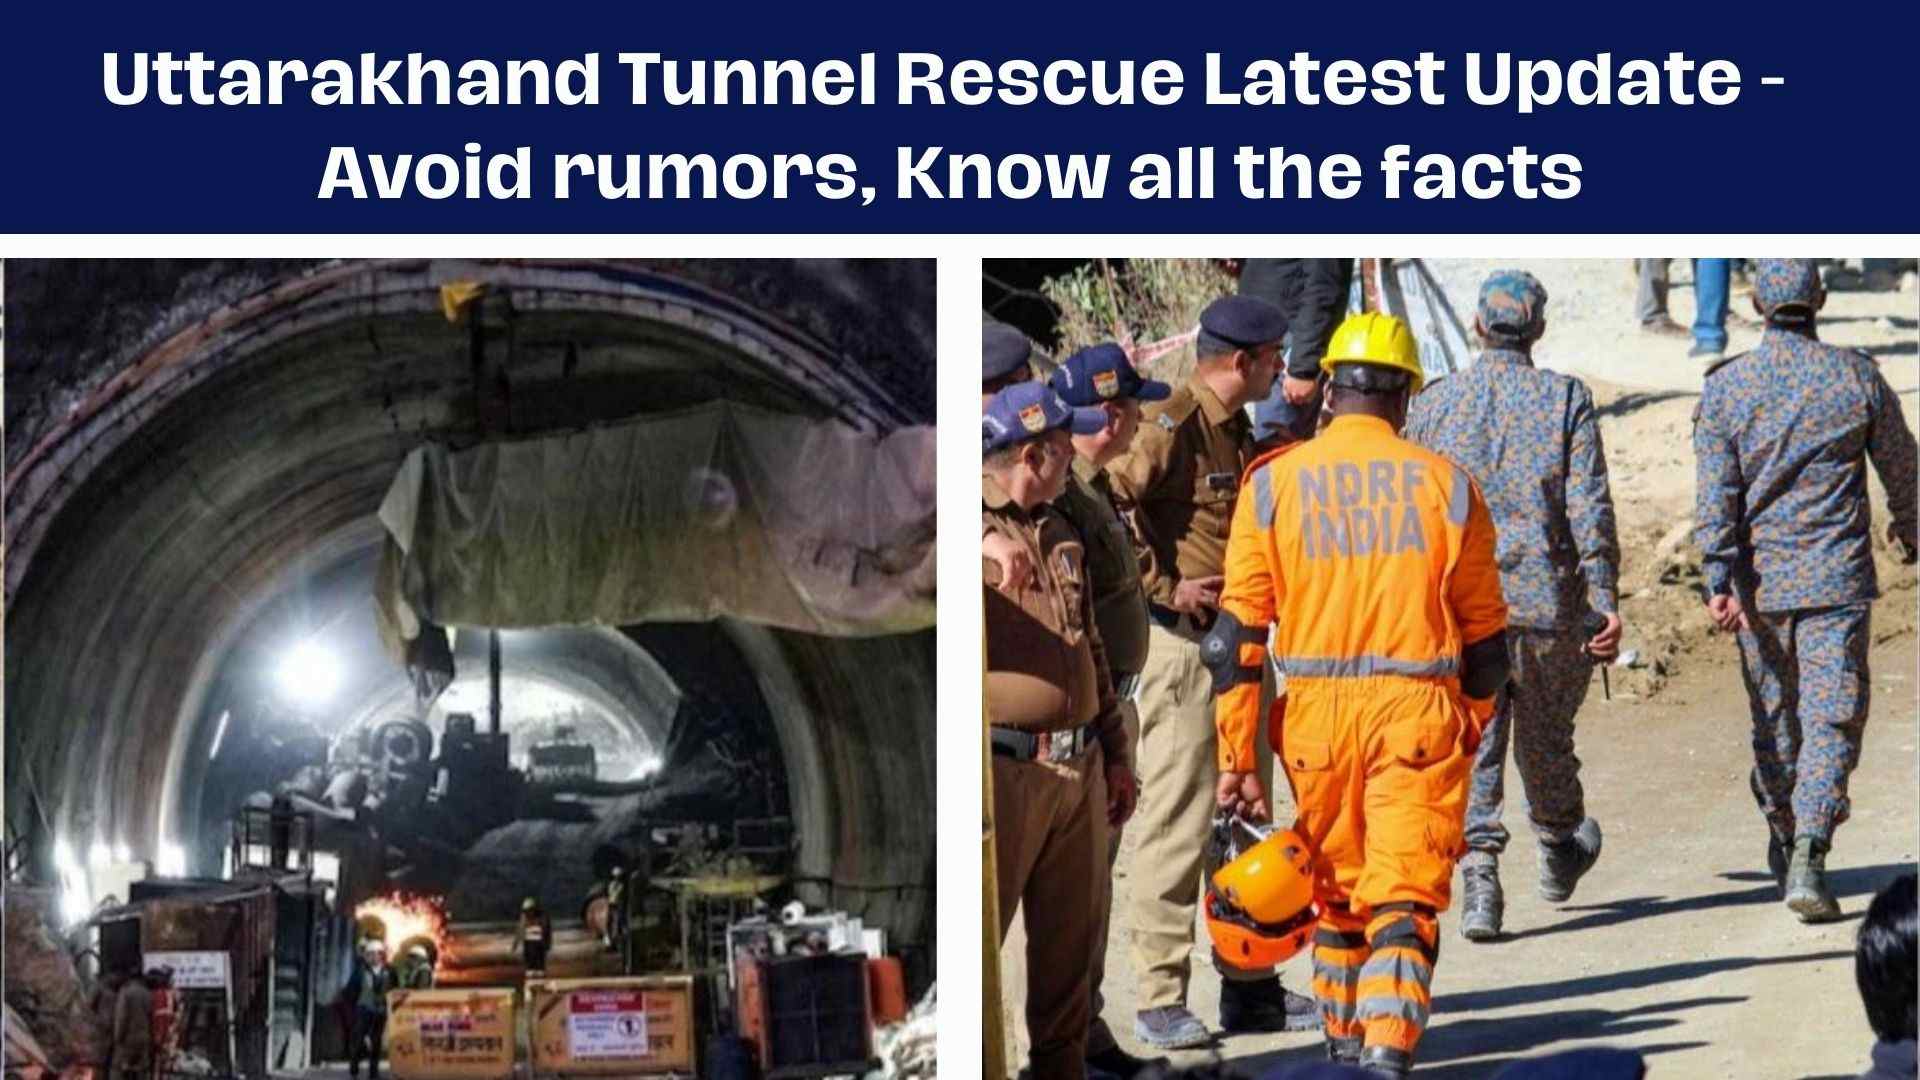 Uttarakhand Tunnel Rescue Operation Latest Update. Avoid rumors, Know all the facts